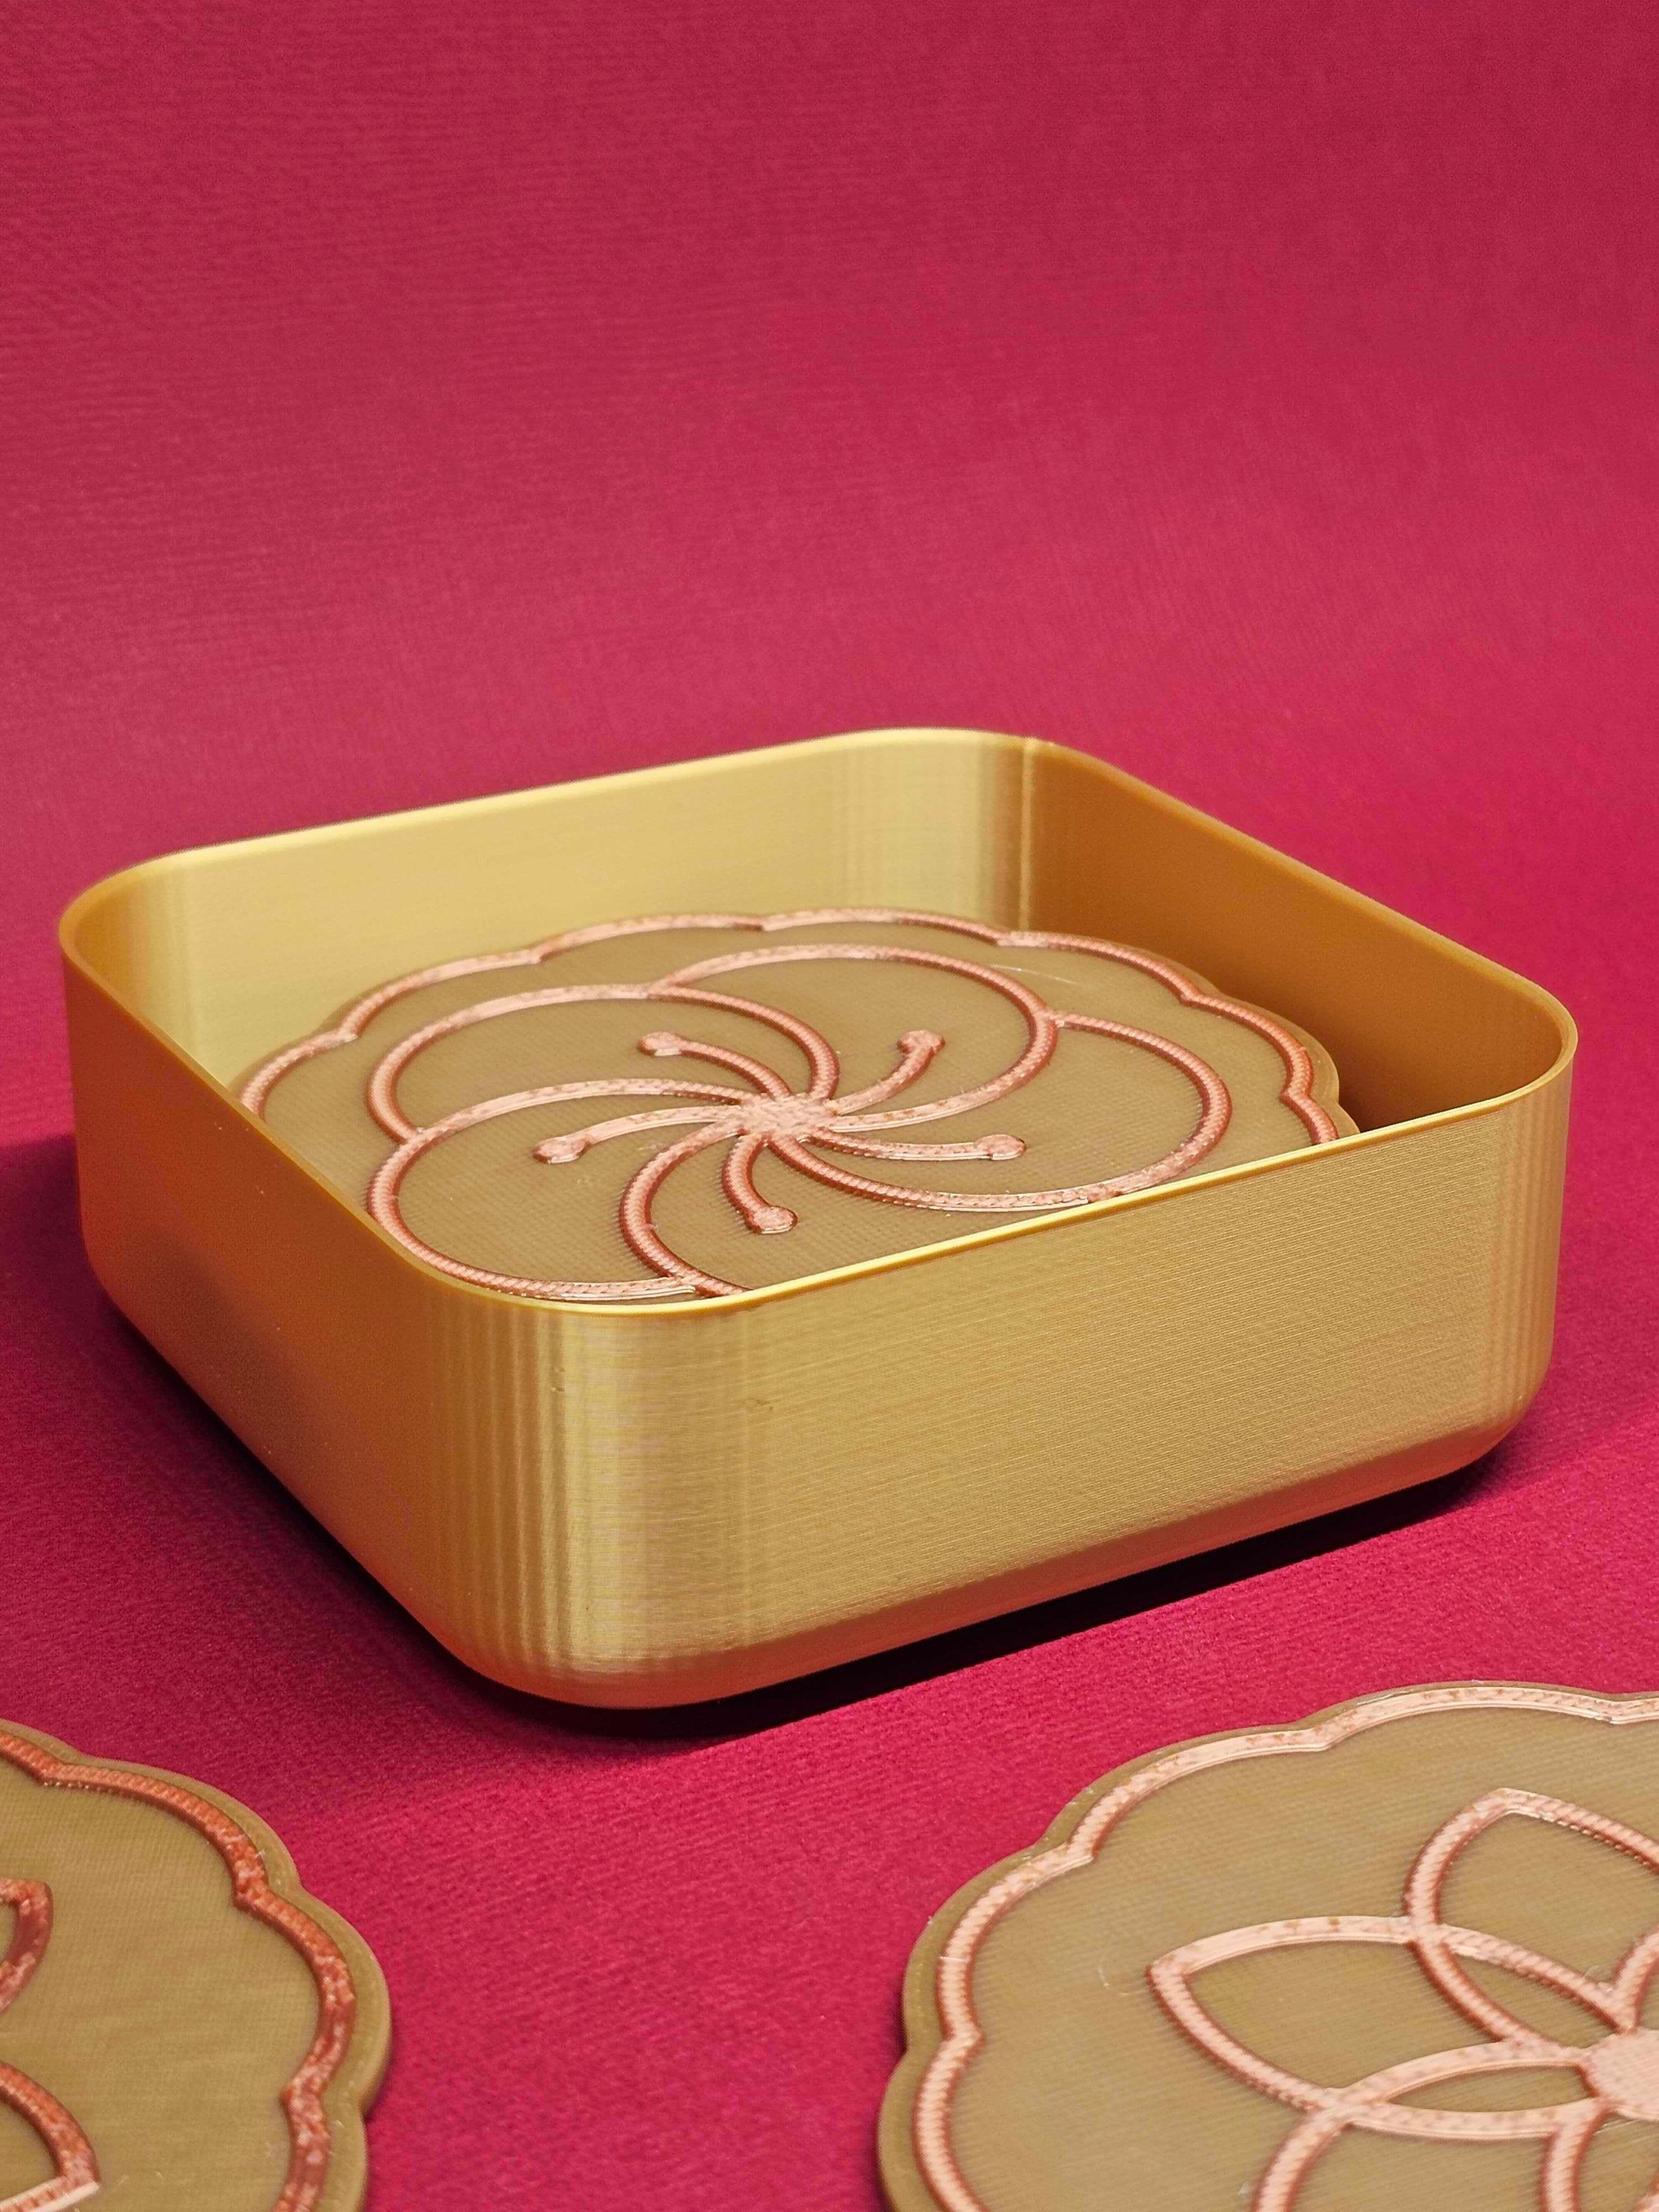 Tray | Coasters holder for 8 mooncake coasters | Designed as a mooncake tray for Mid-Autumn Festival 3d model